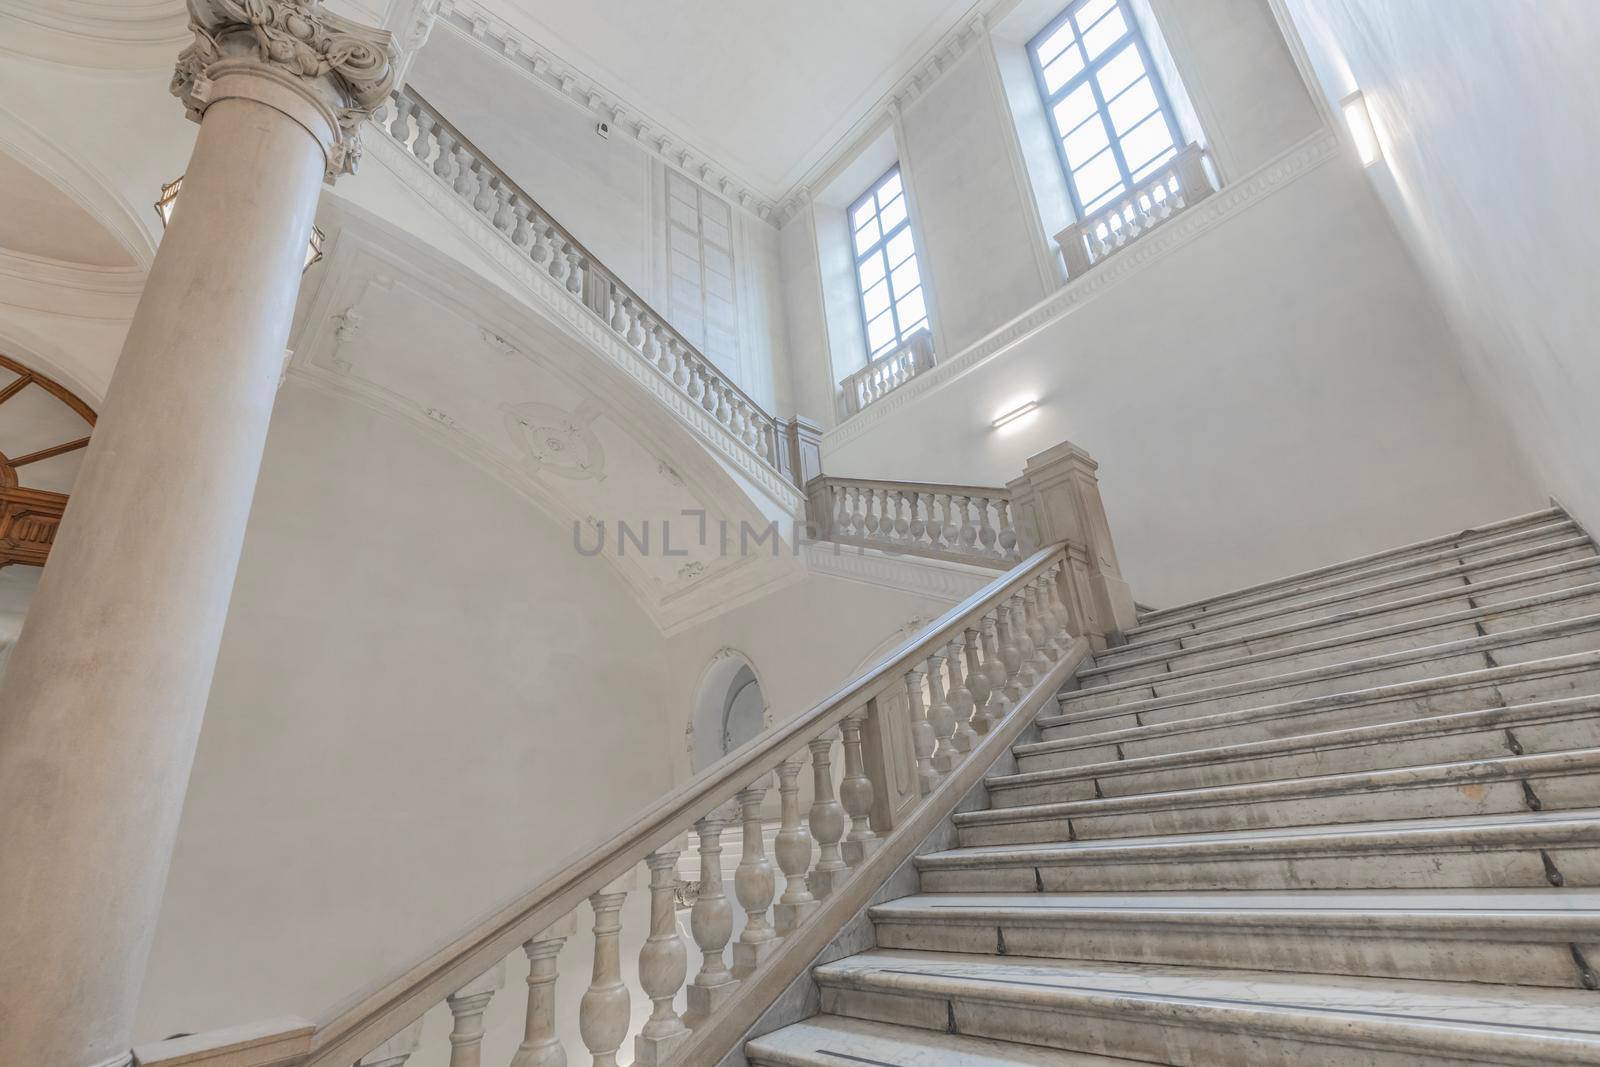 Luxury staircase made of marble in an antique Italian palace by Perseomedusa